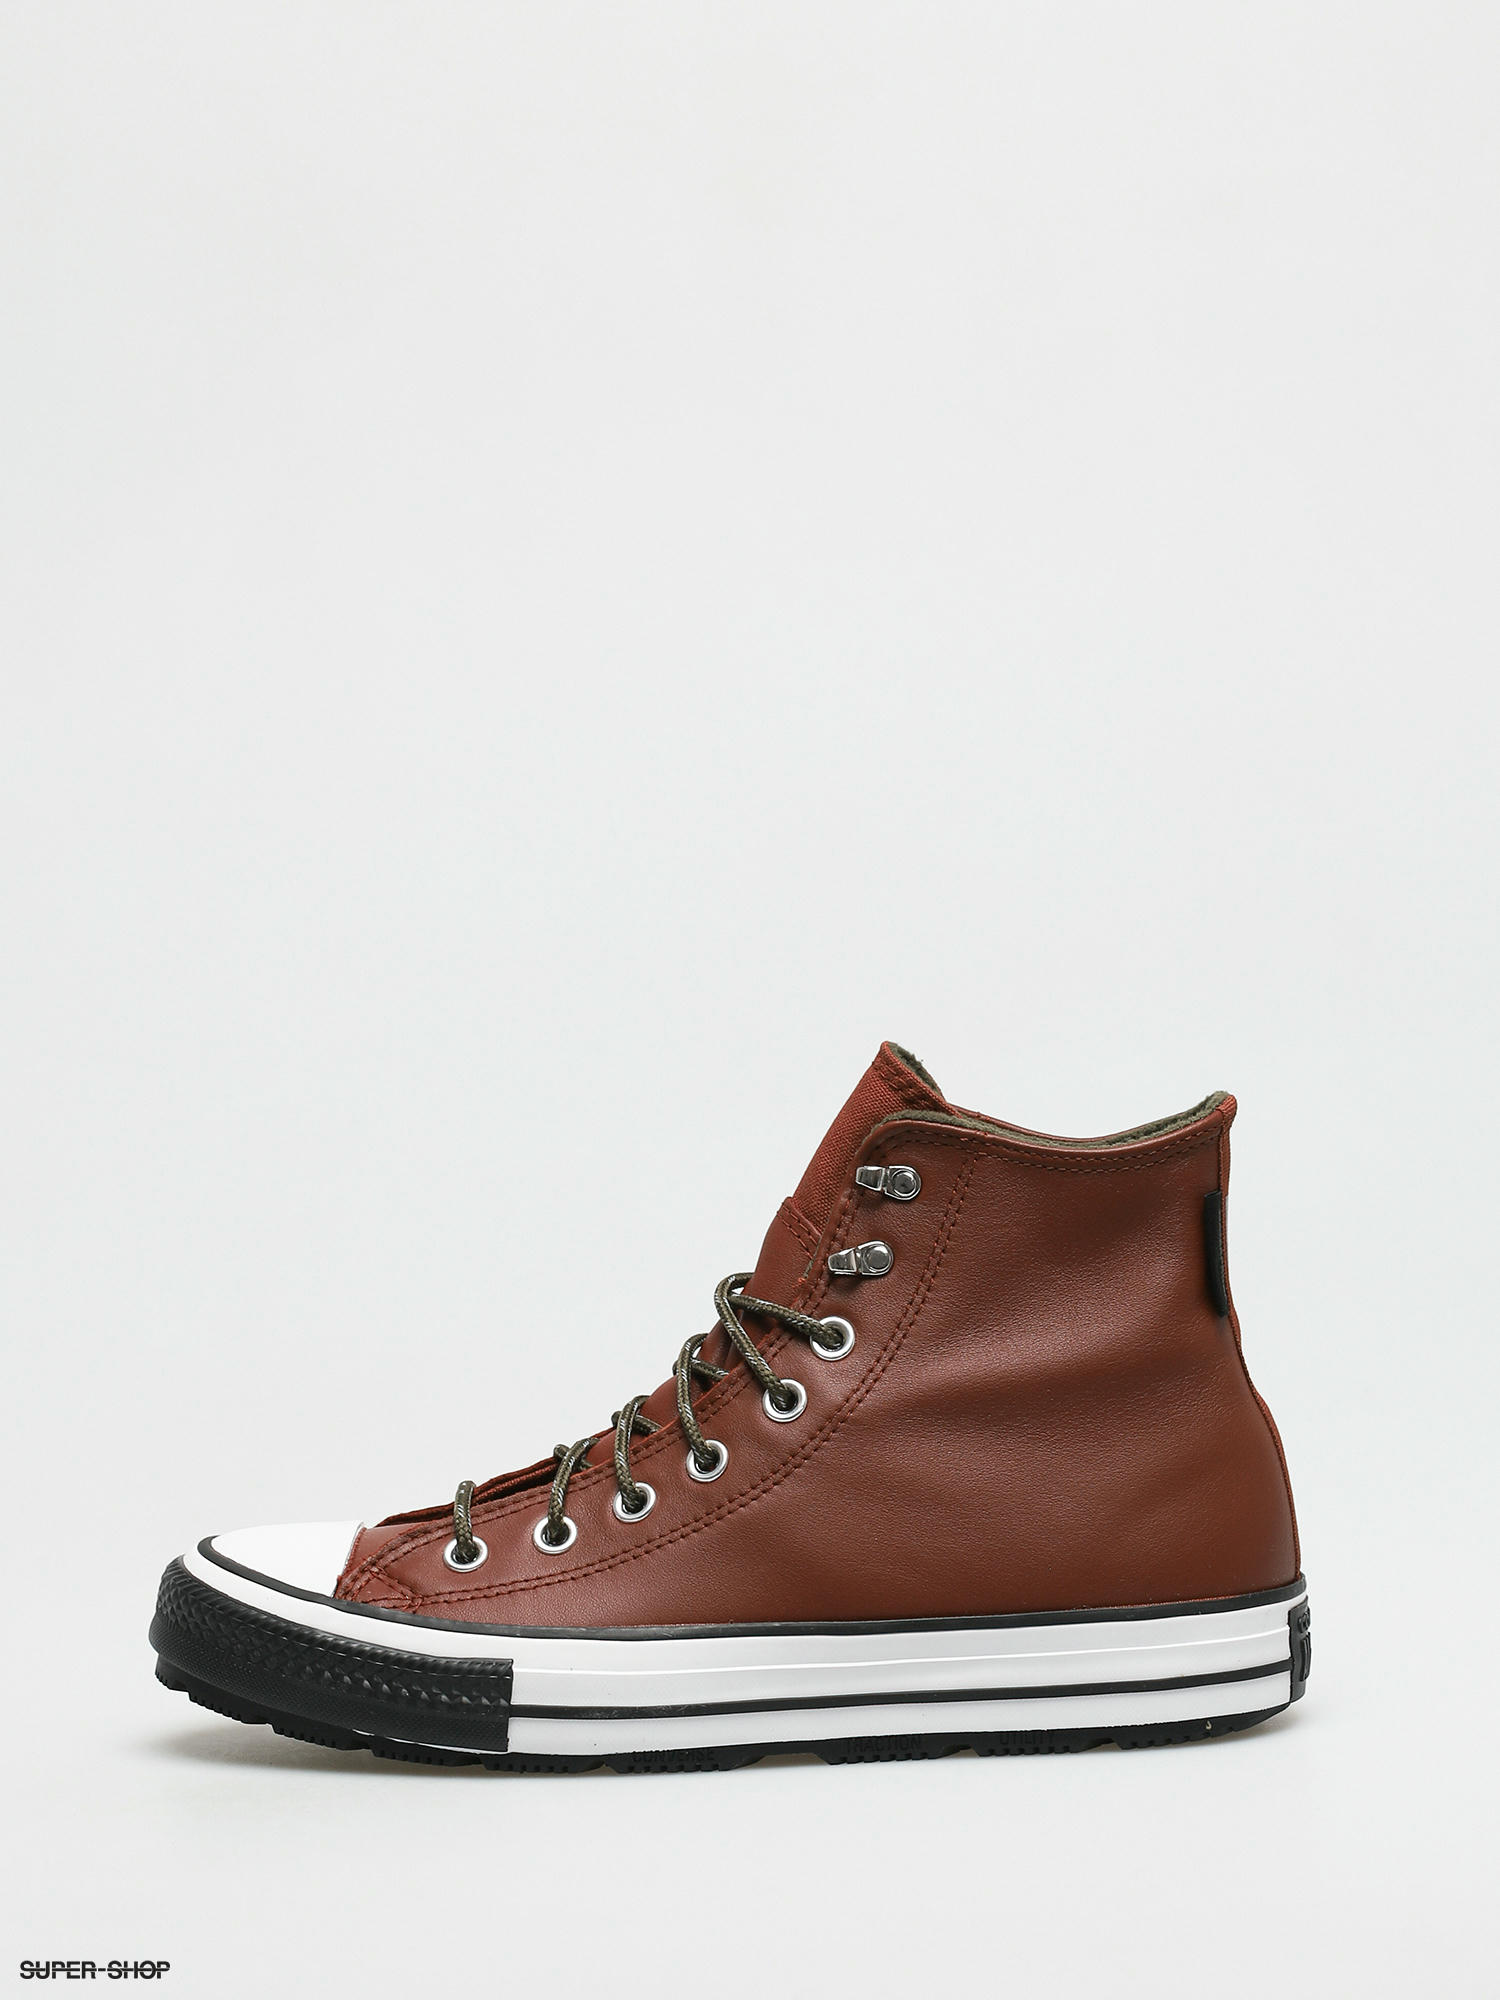 converse all star shoes brown